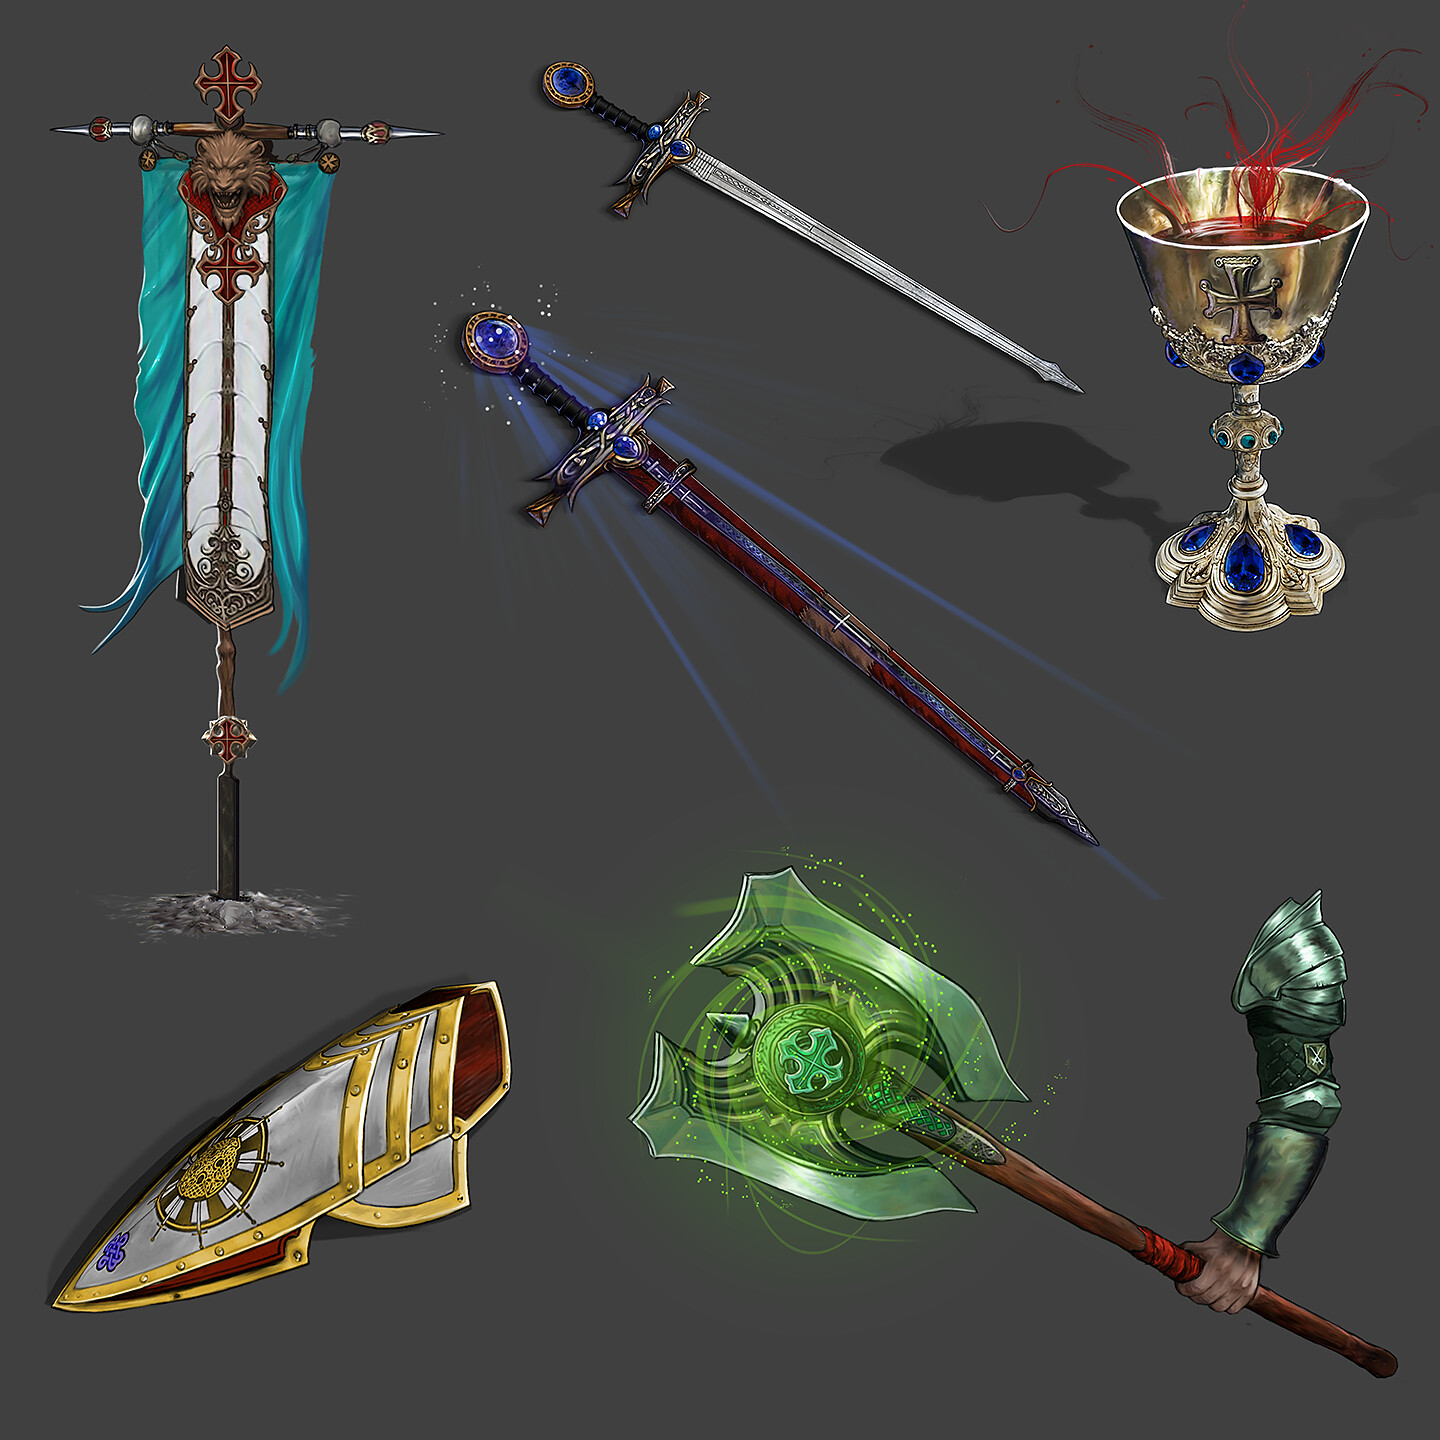 All 5 props rendered